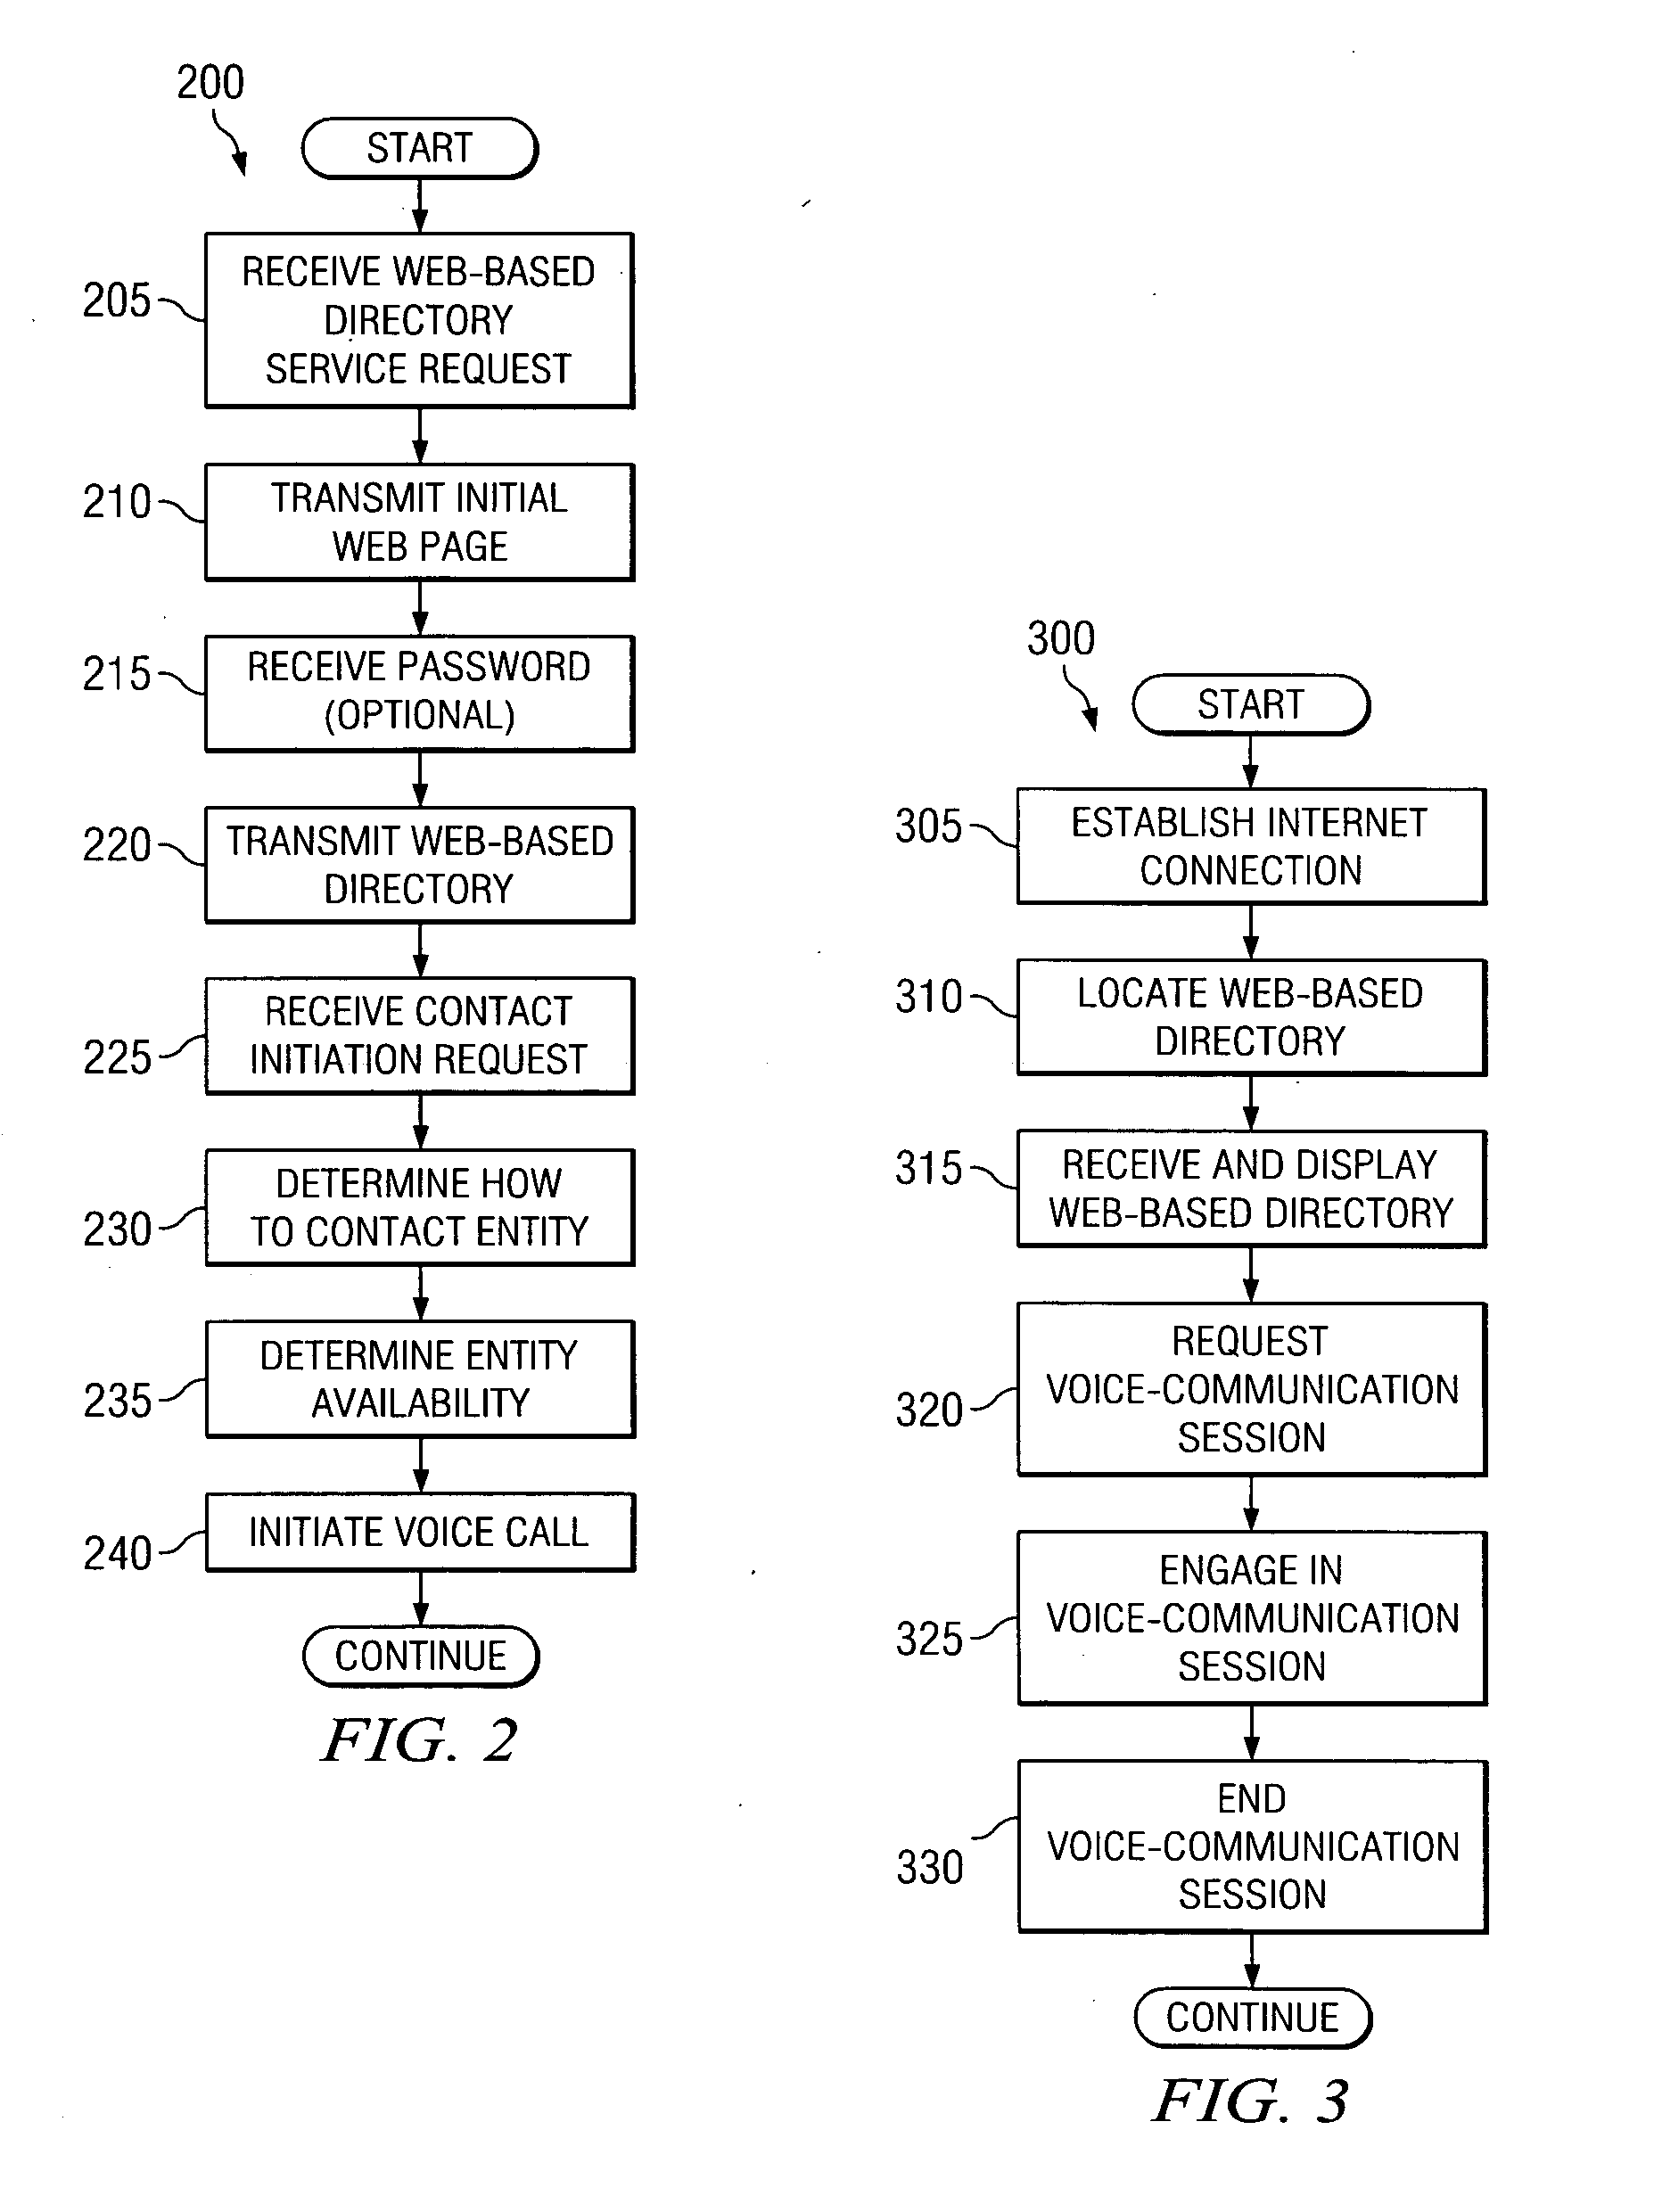 Apparatus and method for a World Wide Web-based directory with automatic call capability